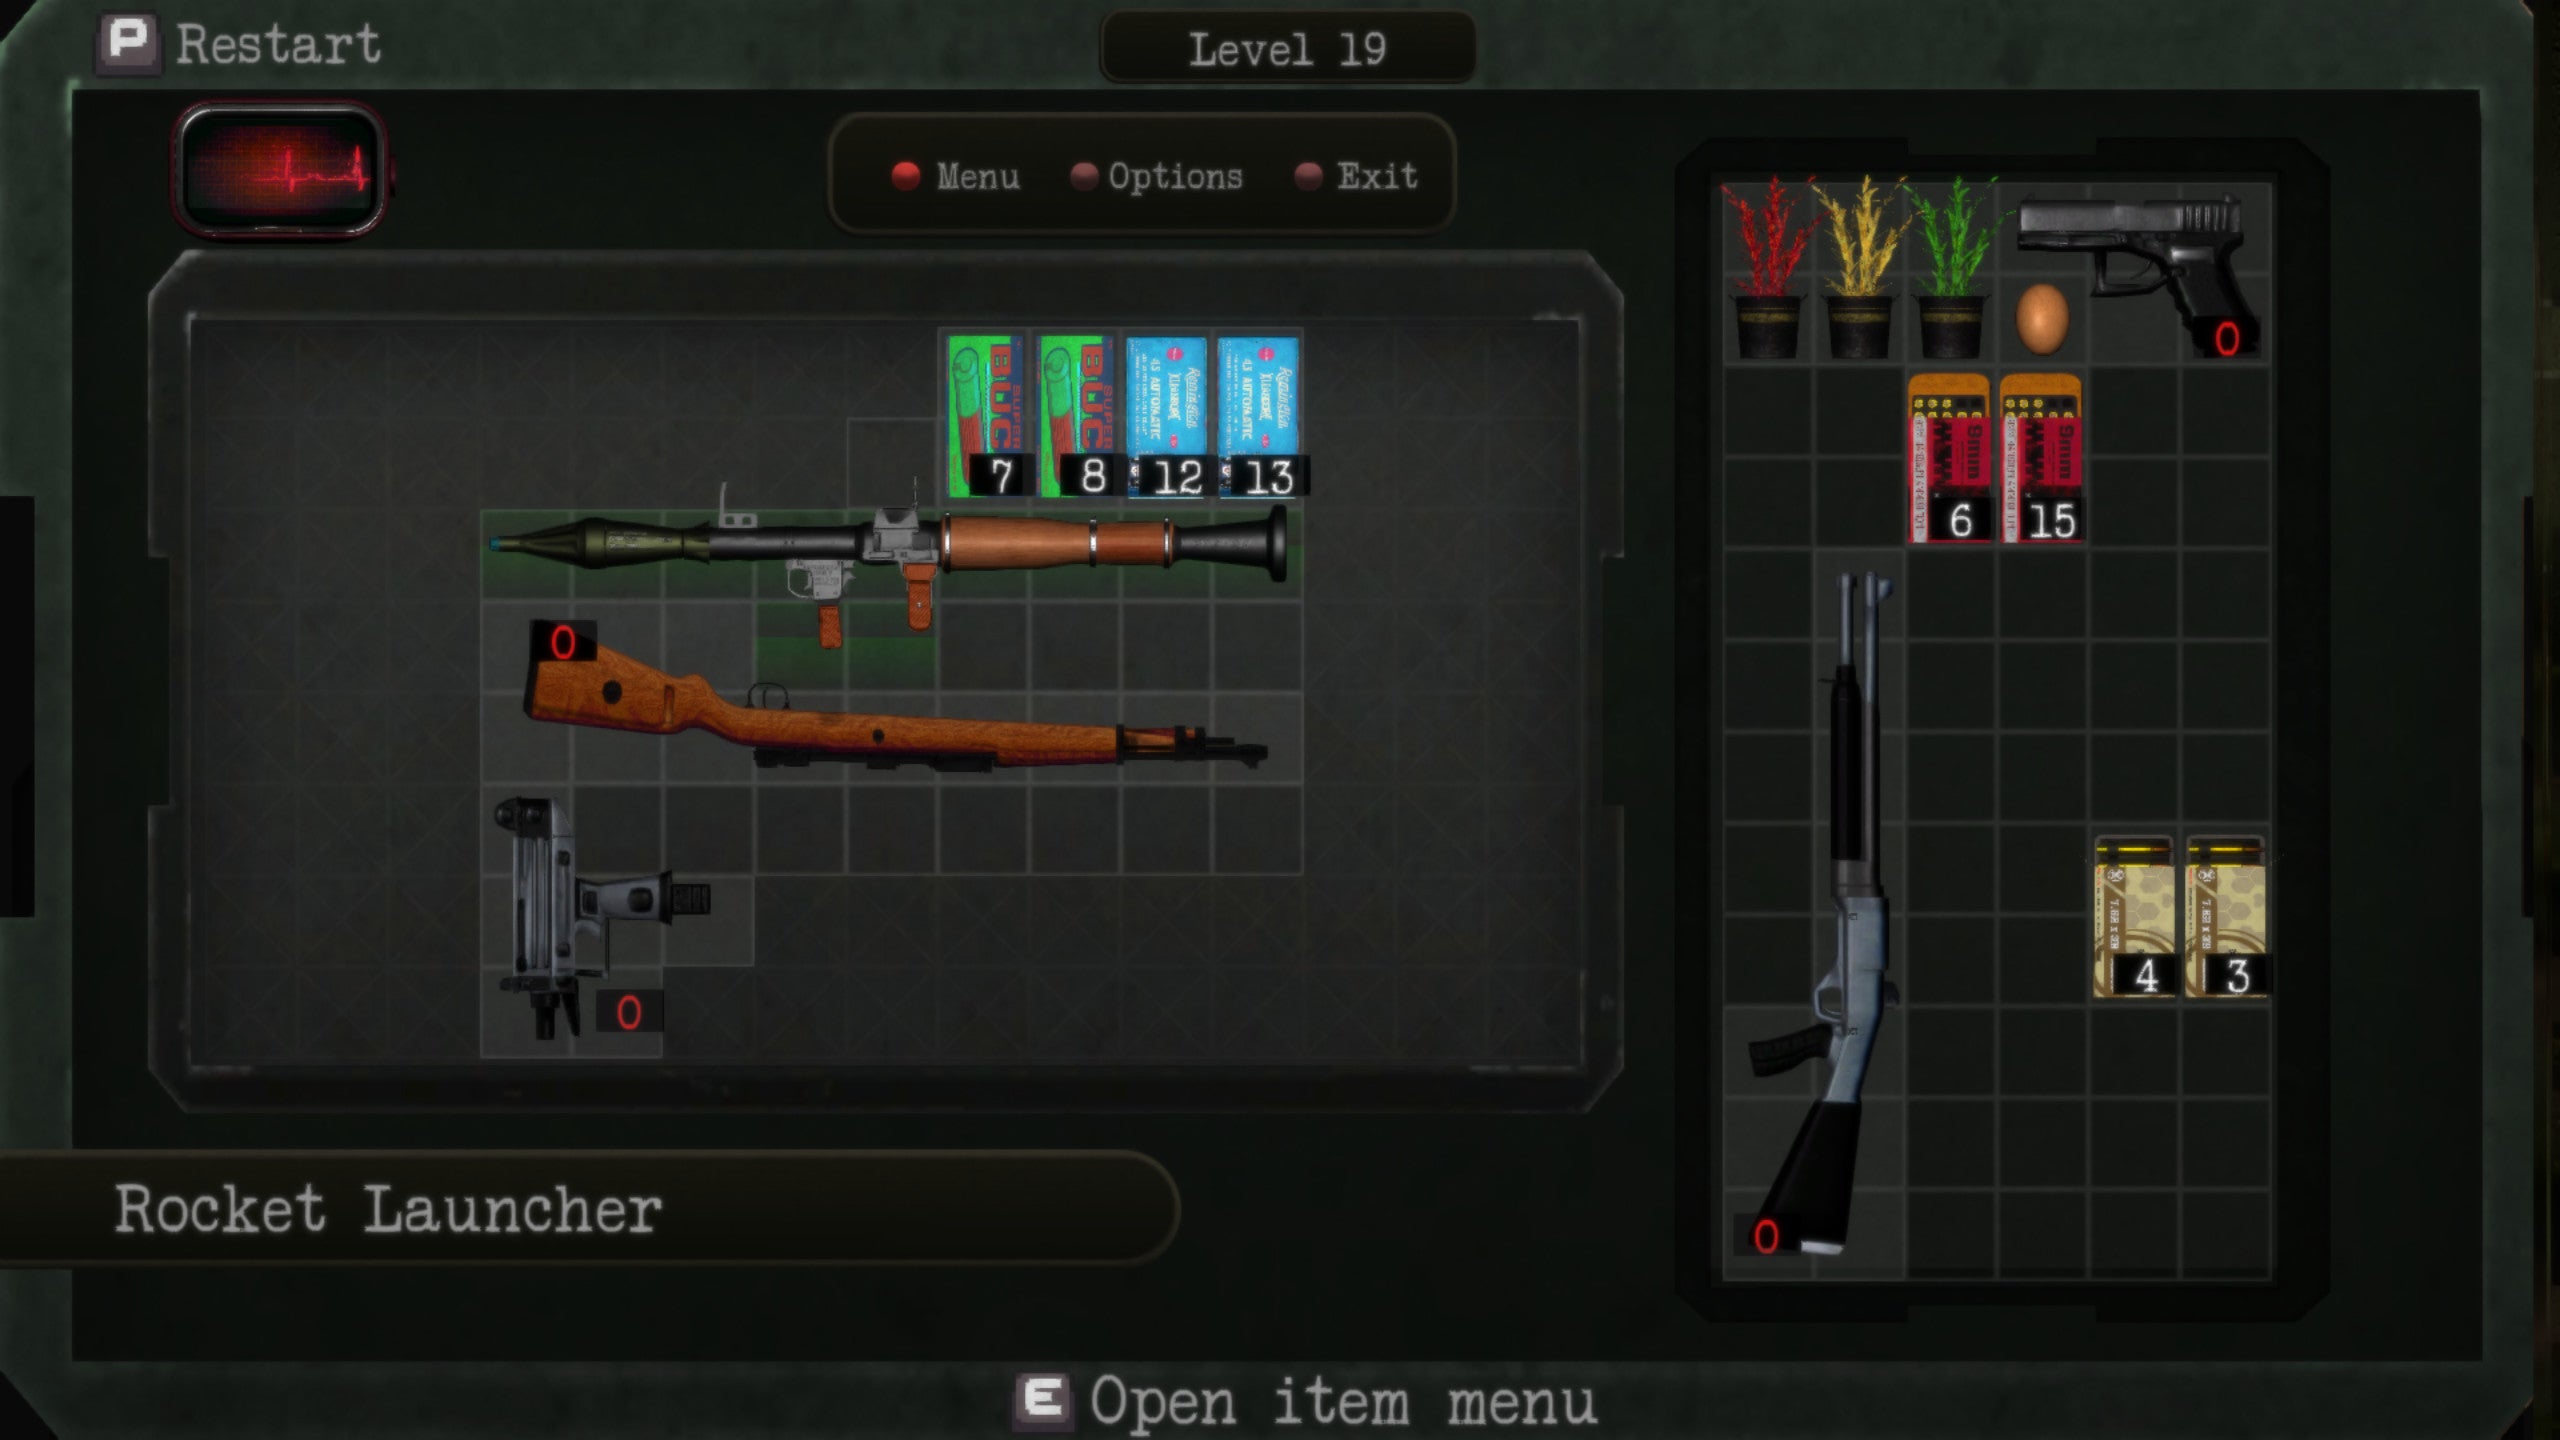 Rotating weapons inside a Resident Evil 4-style inventory in a Save Room screenshot.